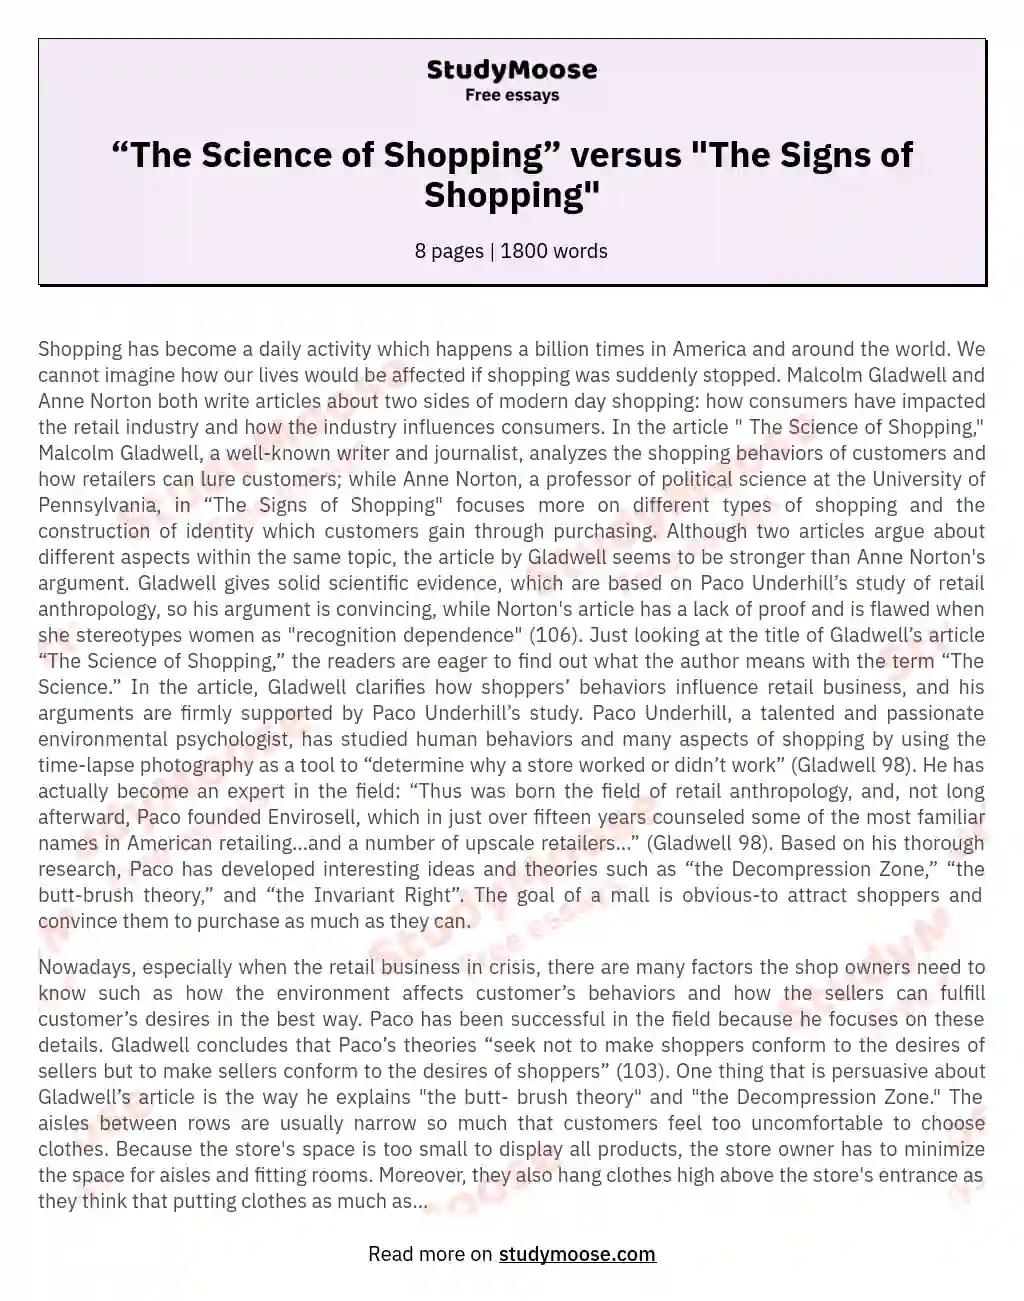 “The Science of Shopping” versus "The Signs of Shopping" essay